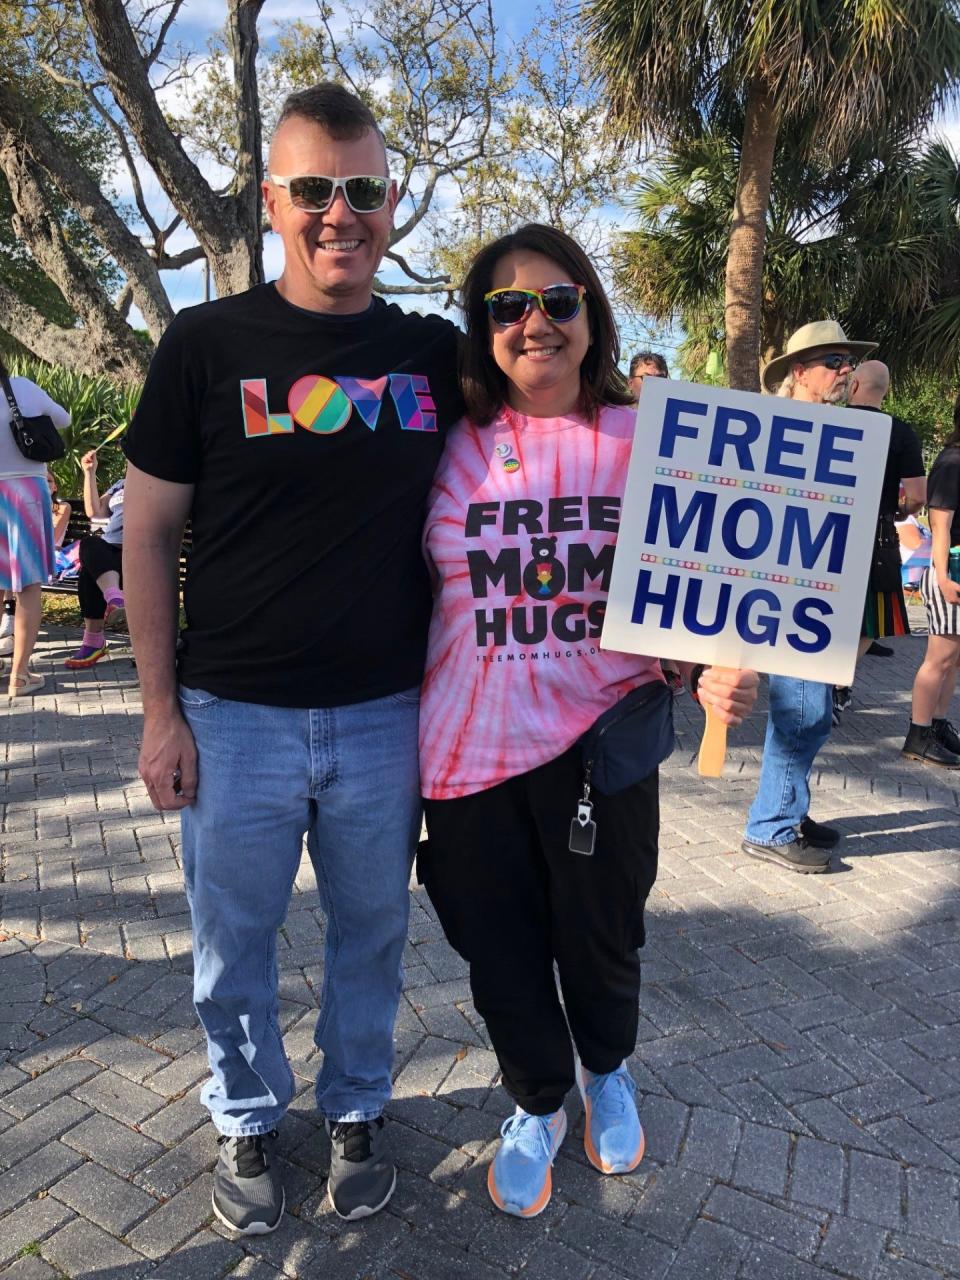 A crowd of more than 400 gathered at Eau Gallie Square Park Saturday to celebrate International Transgender Day of Visibility. The event featured music, speakers and a march on Eau Gallie Causeway.